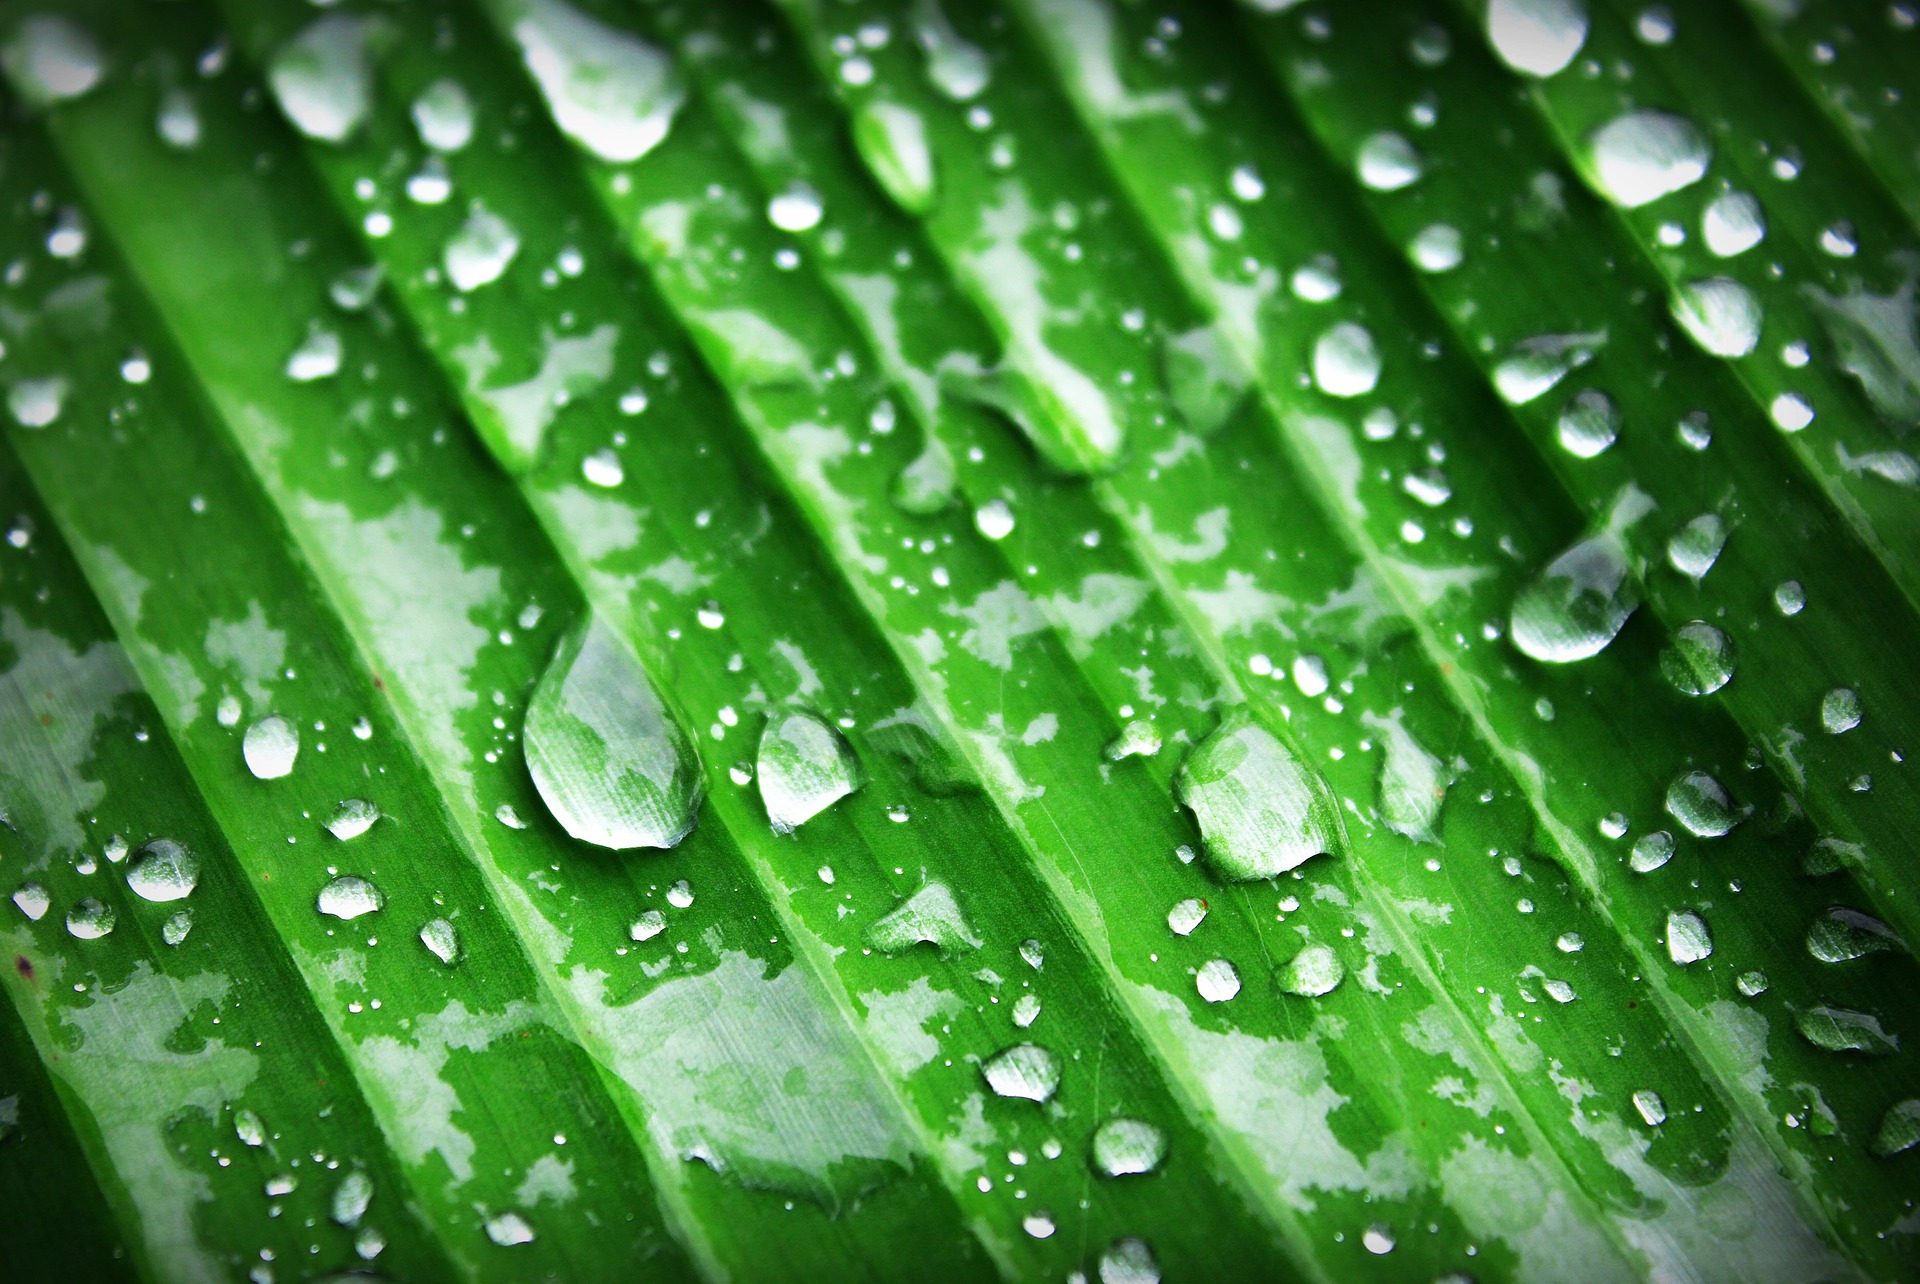 water droplets accumulating on a green leaf